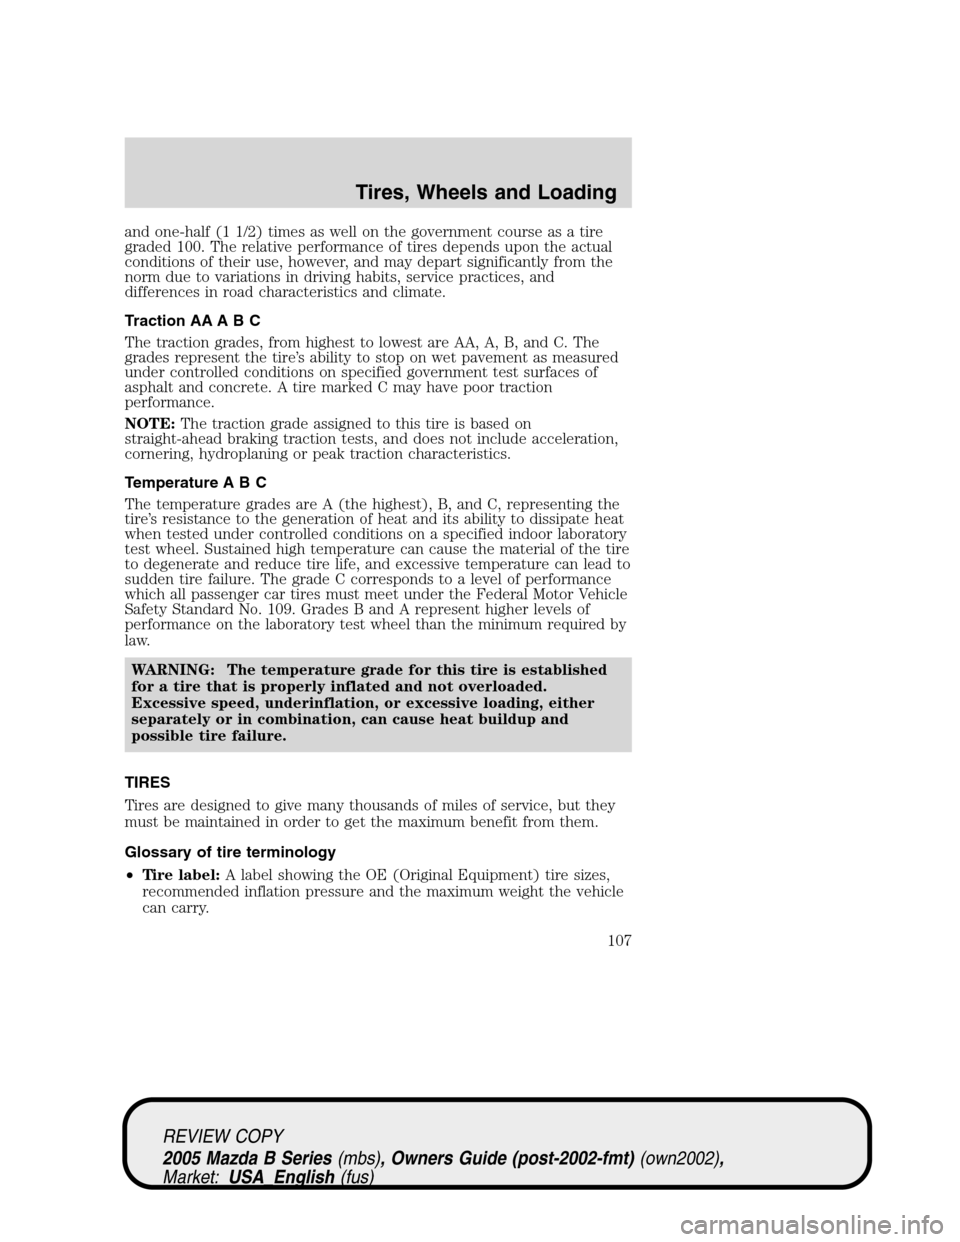 MAZDA MODEL B2300 TRUCK 2005  Owners Manual (in English) and one-half (1 1/2) times as well on the government course as a tire
graded 100. The relative performance of tires depends upon the actual
conditions of their use, however, and may depart significant